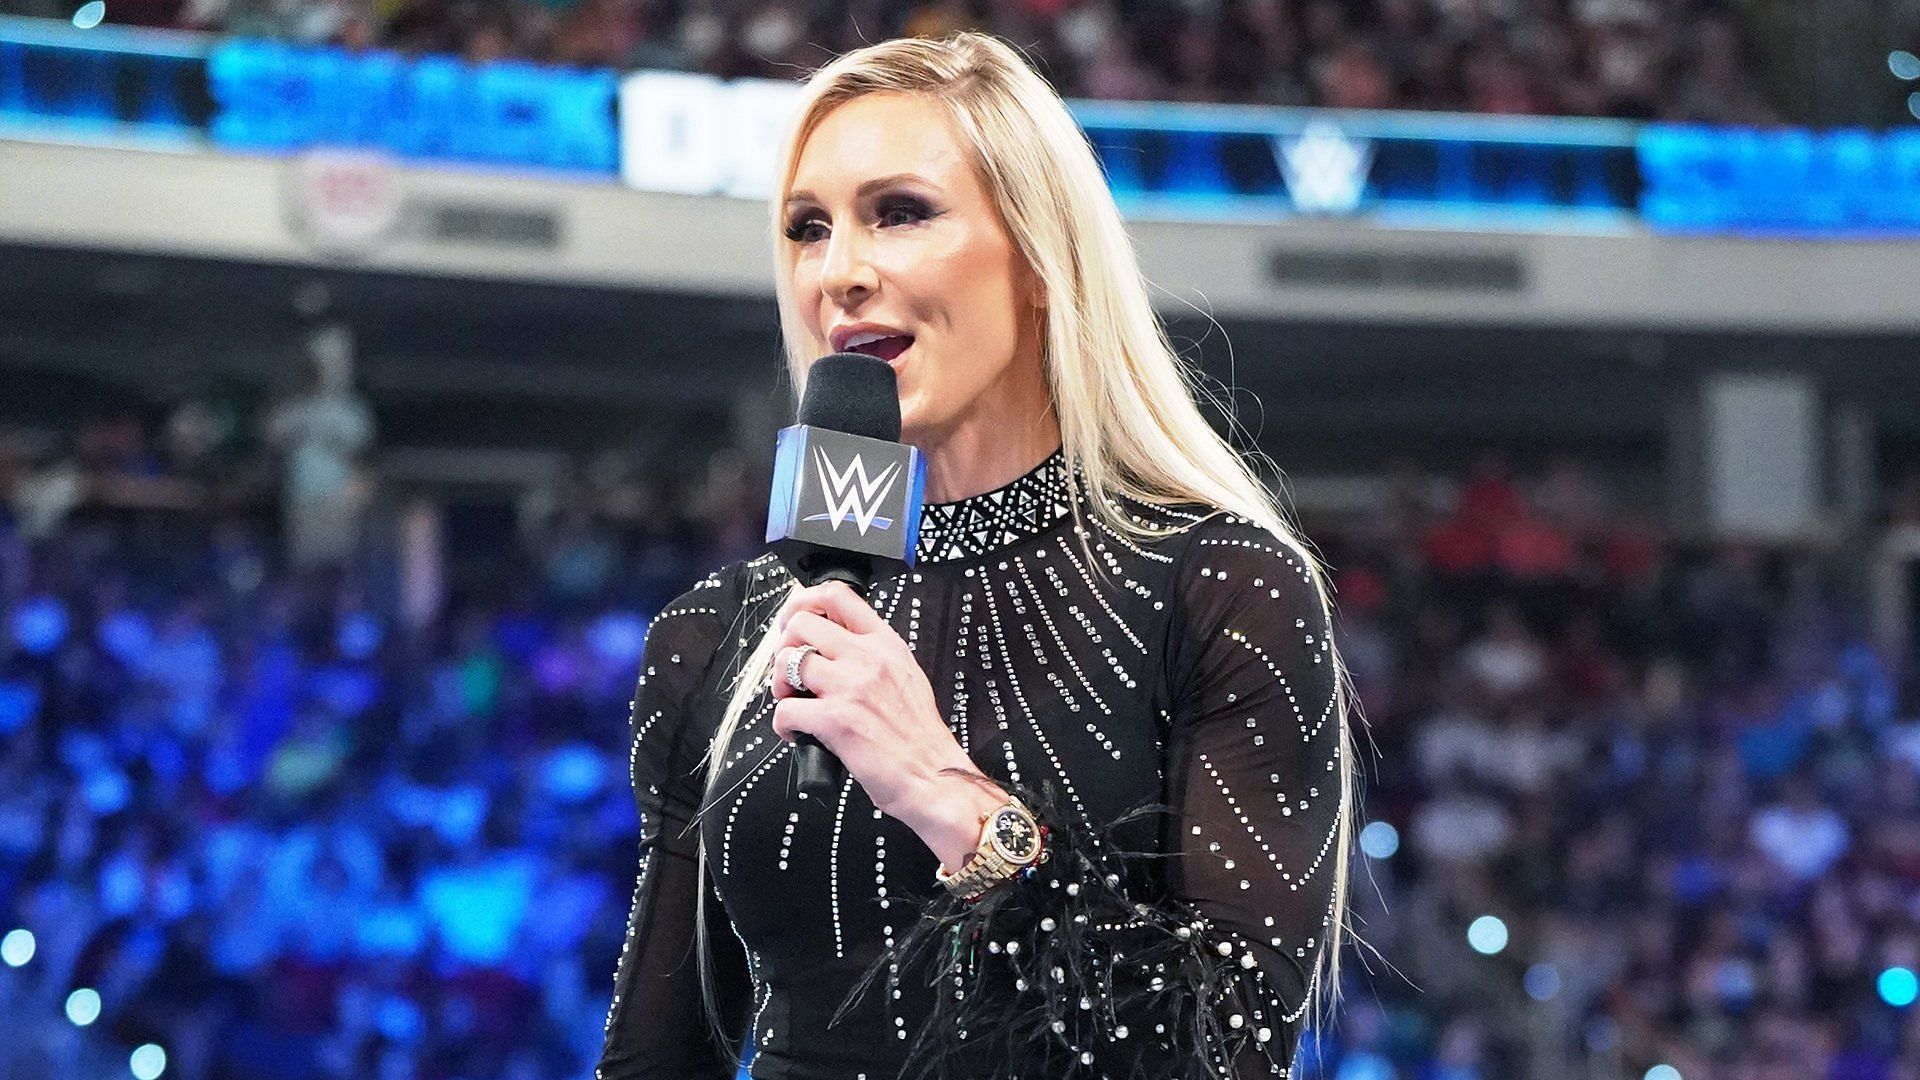 Charlotte Flair cuts a promo on WWE SmackDown